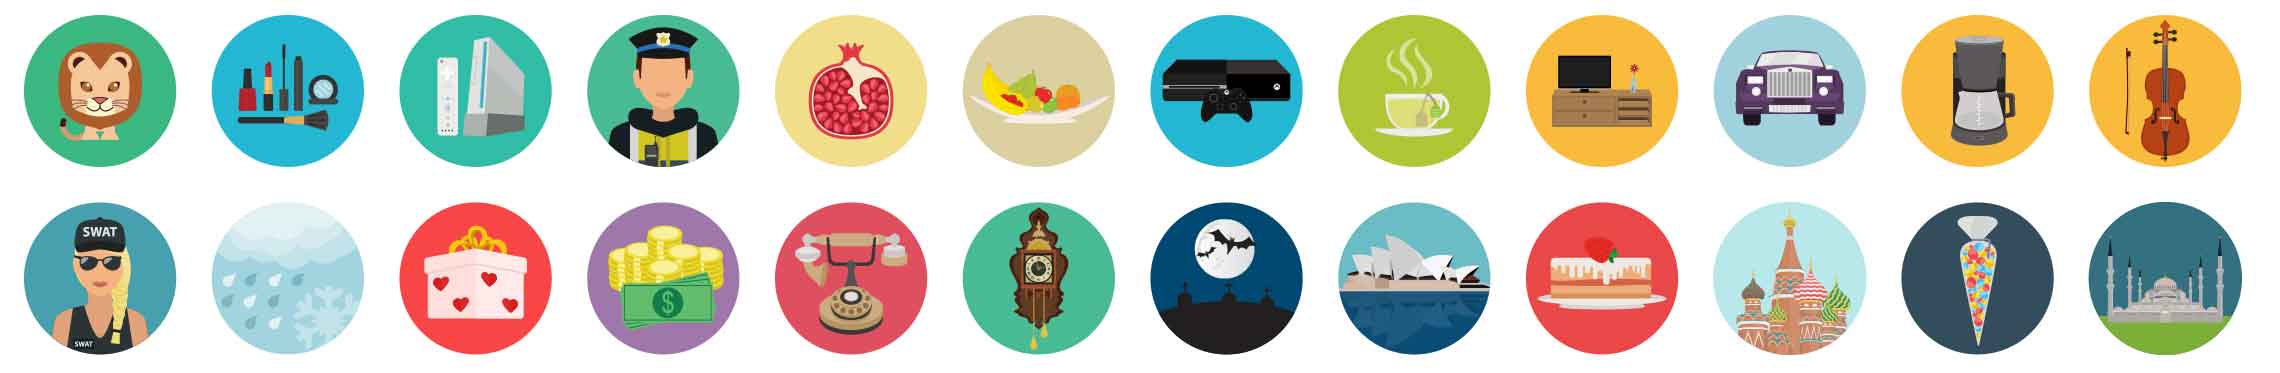 Flat icons pack